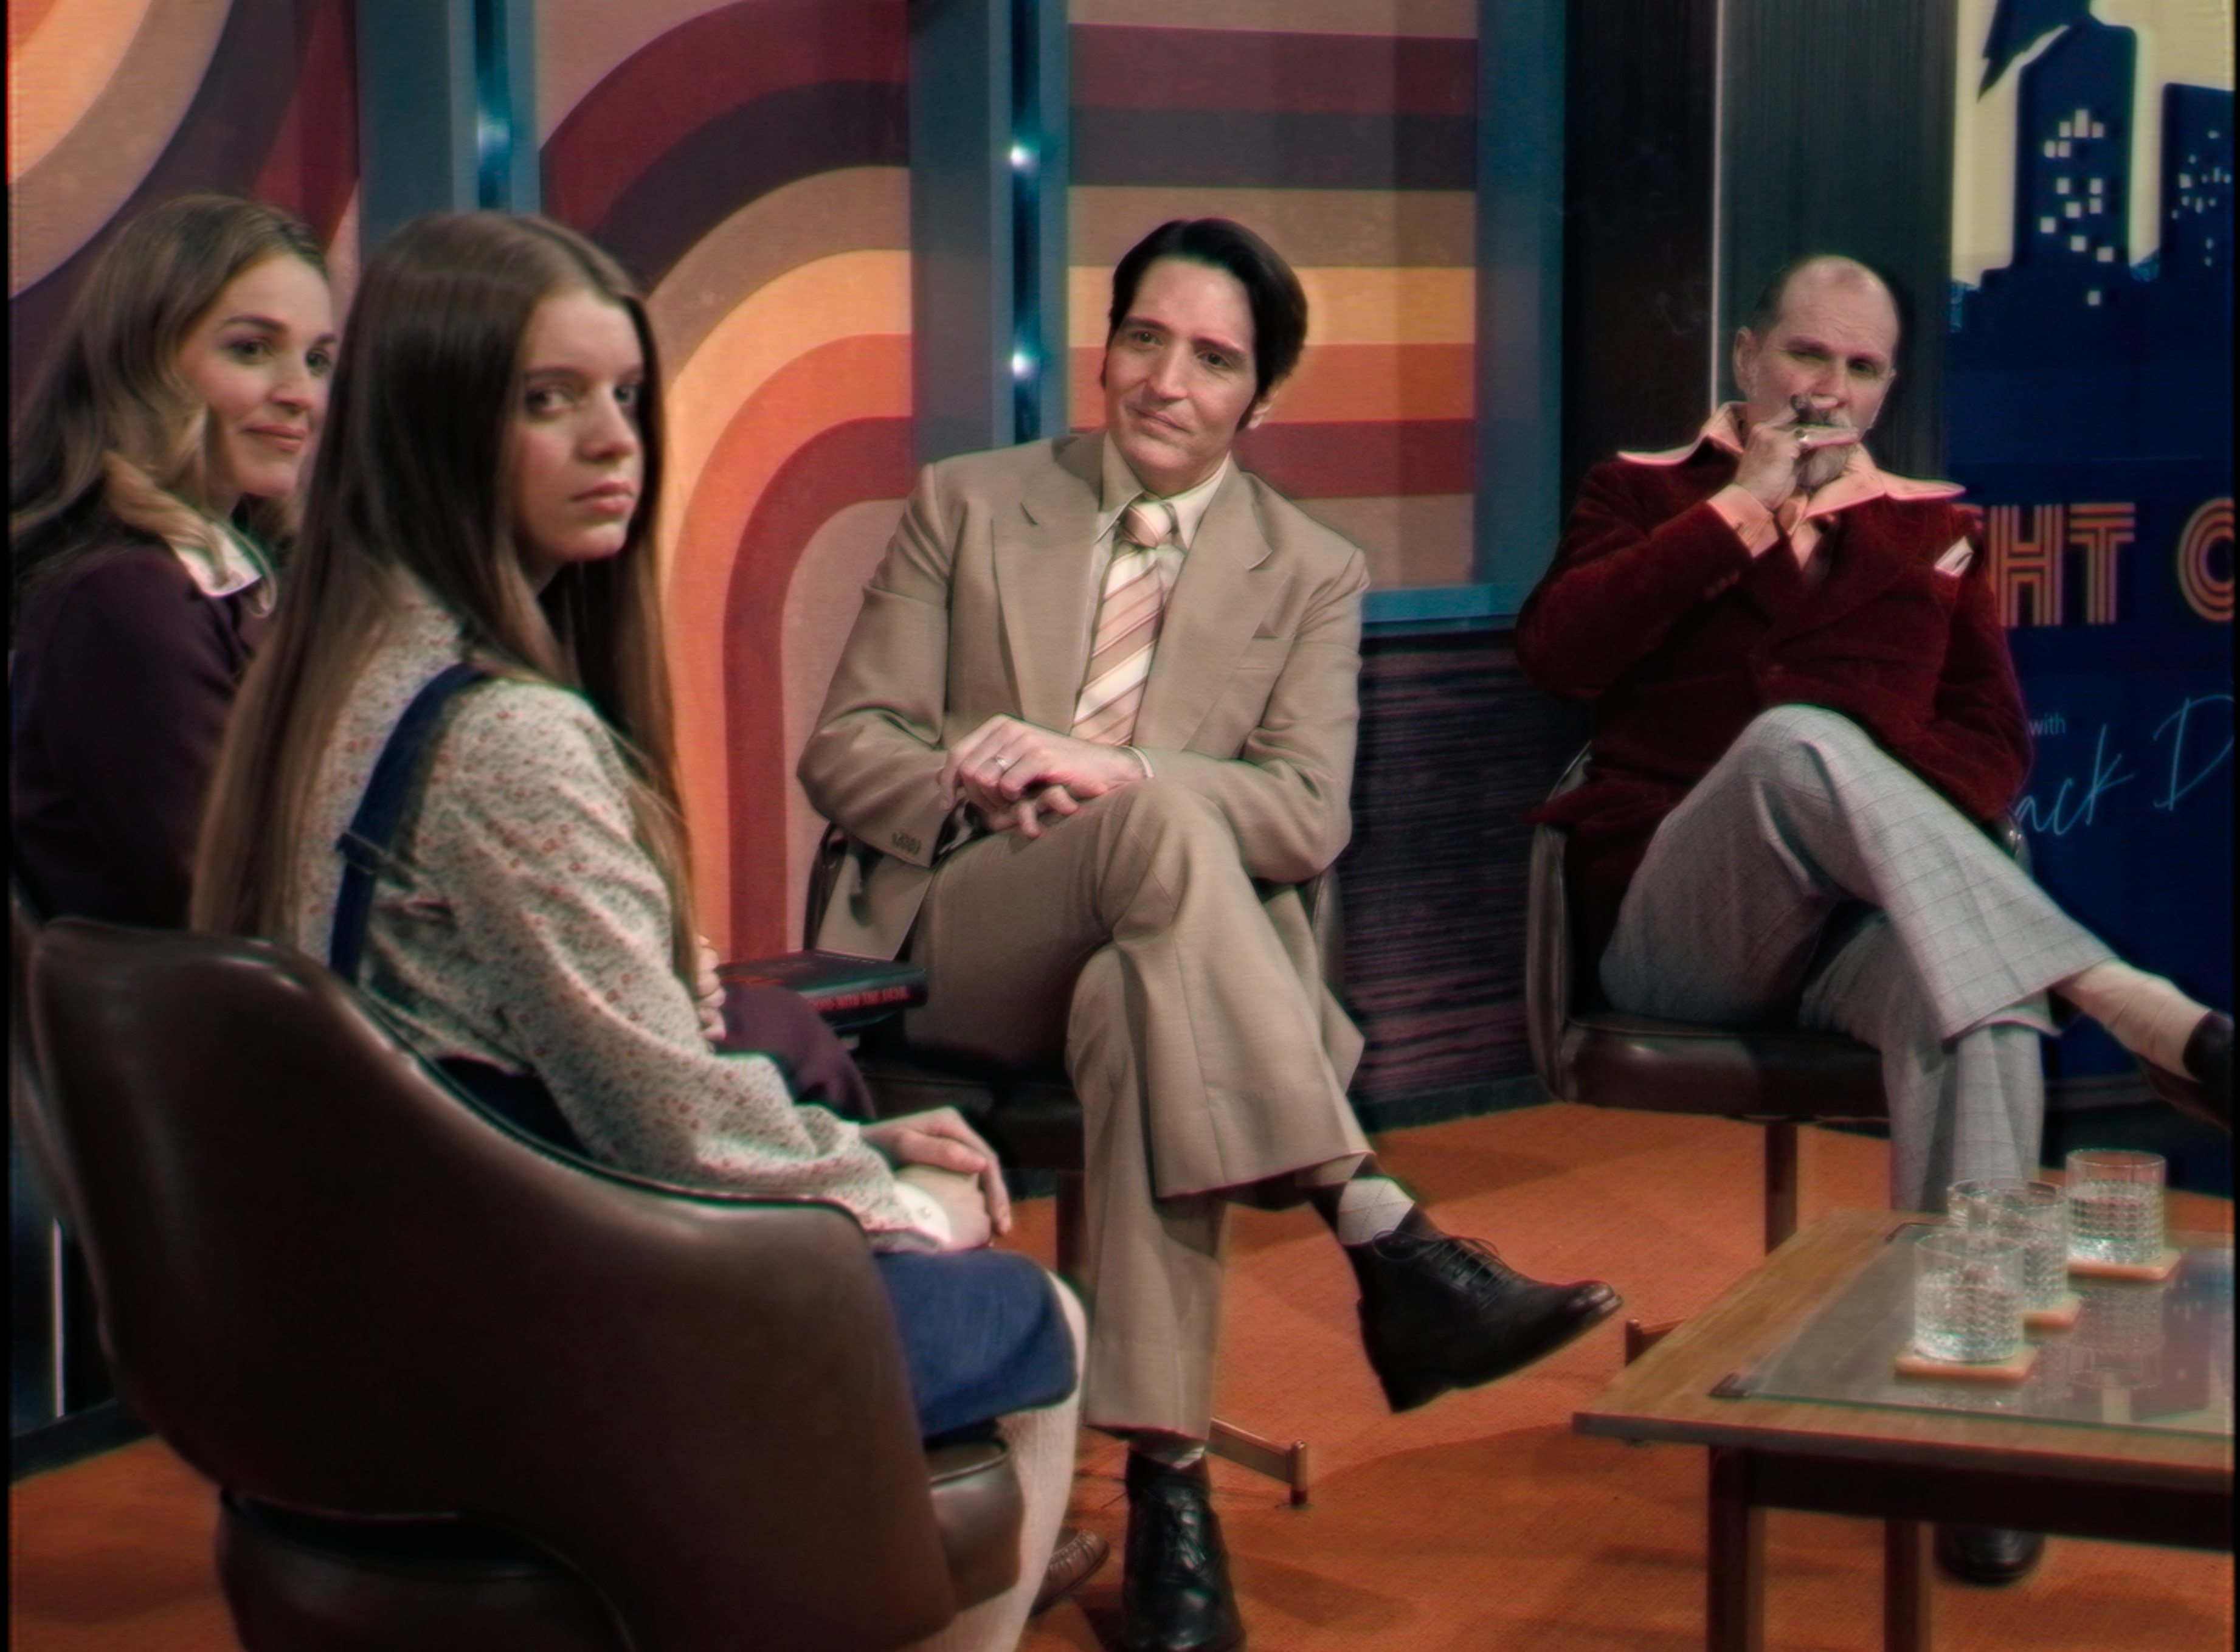 Laura Gordon as June Ross-Mitchell, Ingrid Torelli as Lilly, David Dastmalchian as Jack Delroy, and Ian Bliss as Carmichael Haig in Cameron and Colin Cairnes' supernatural horror film, Late Night with the Devil